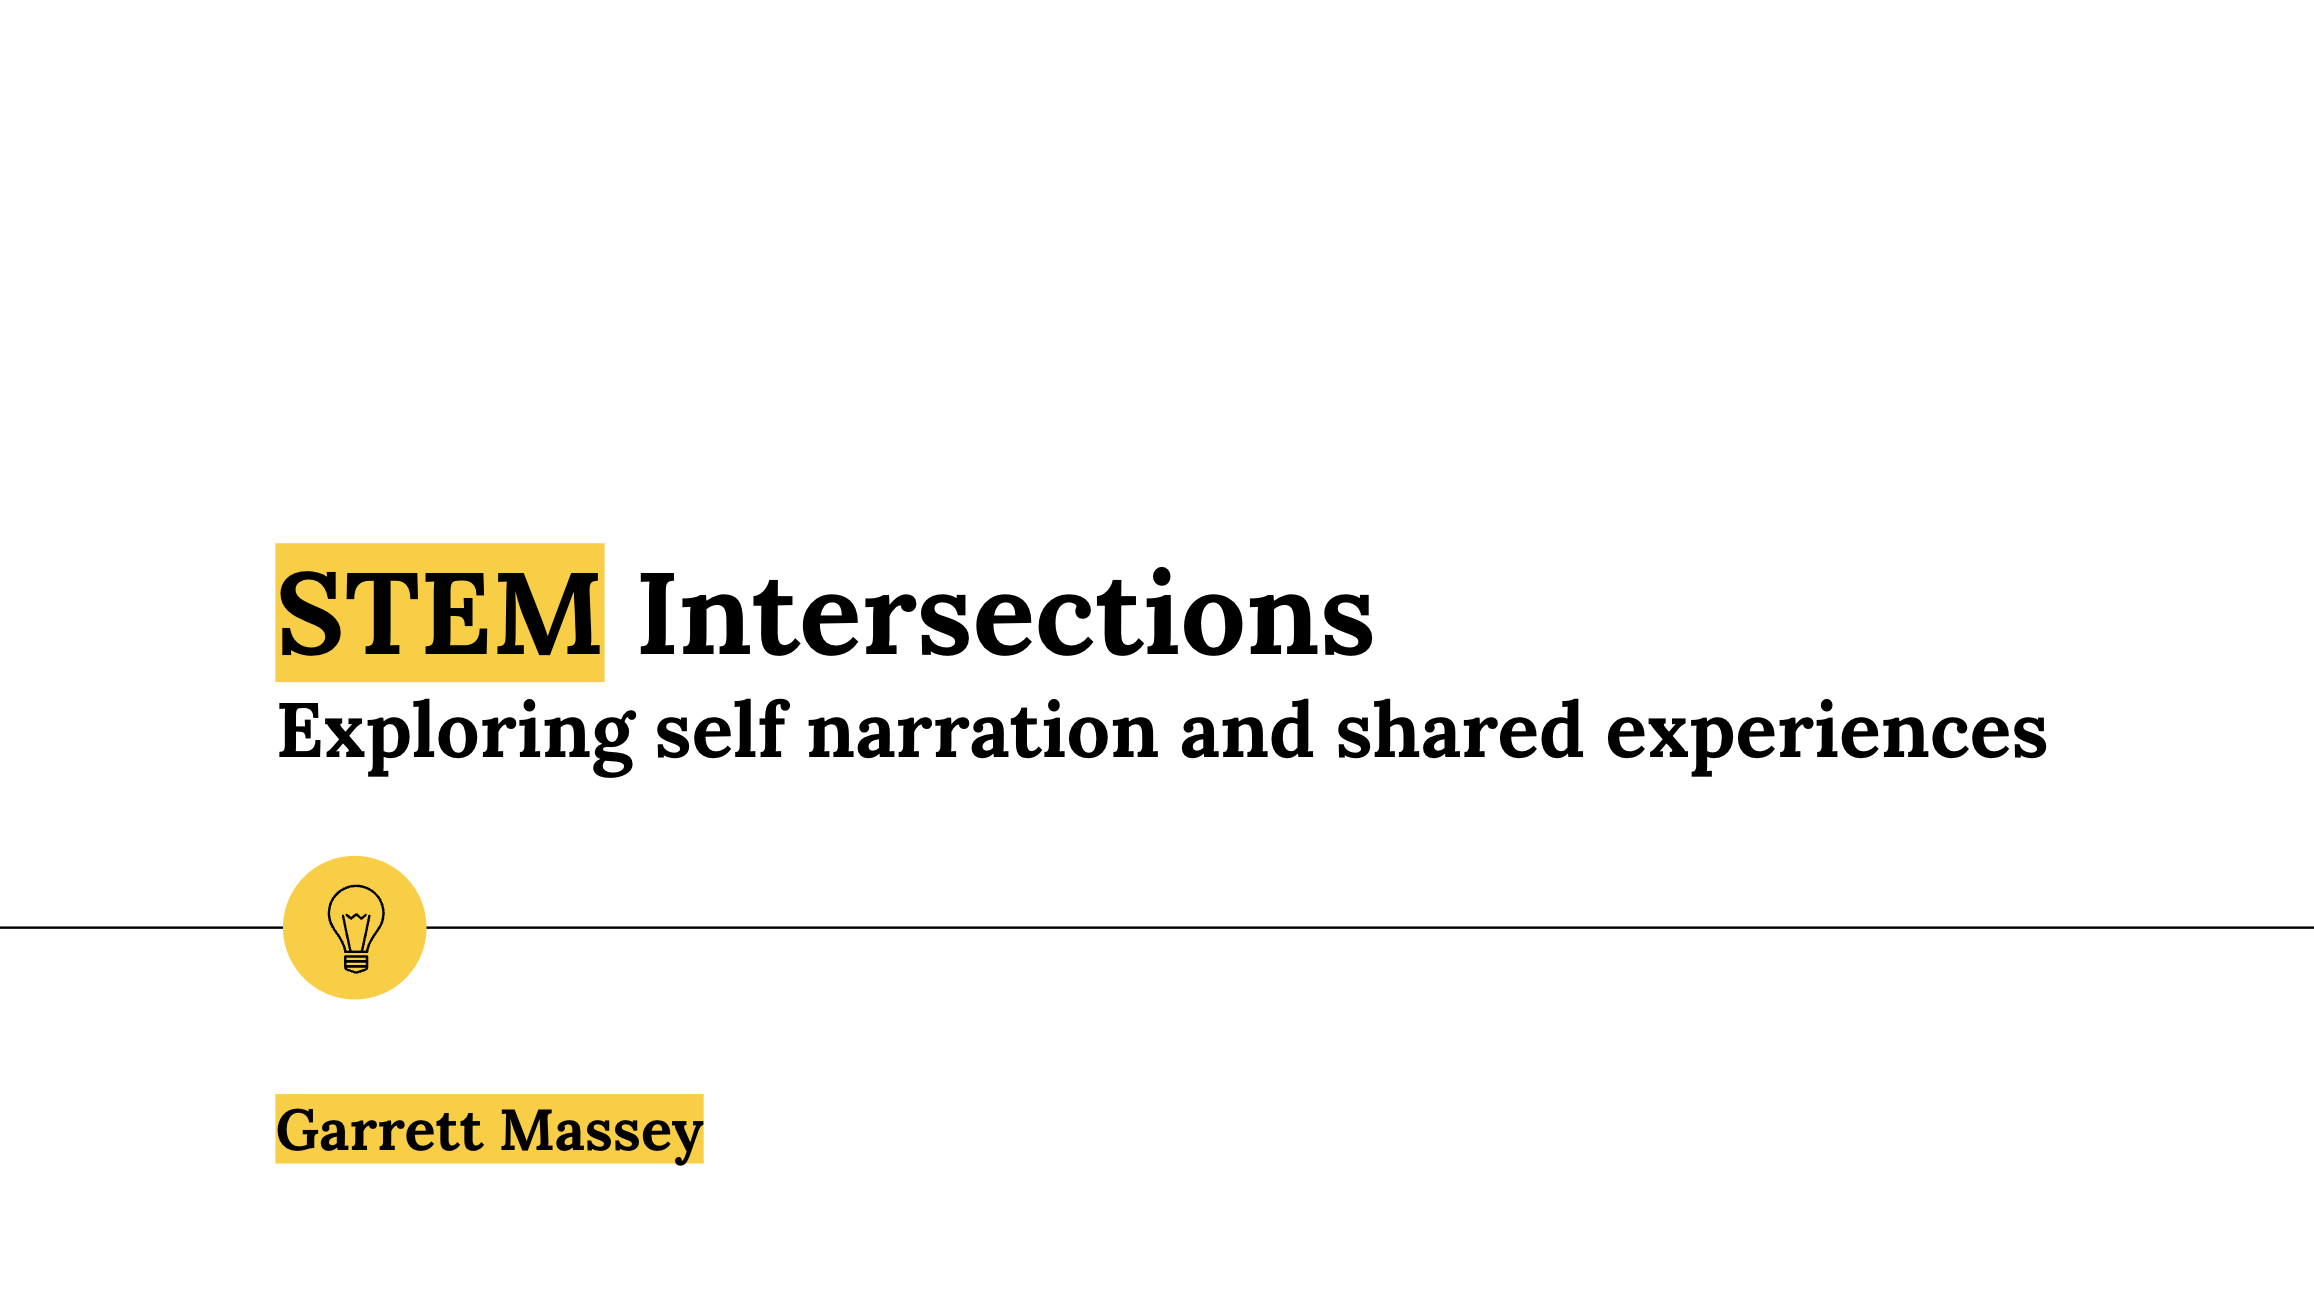 Screenshot of the presentation title card reading "STEM Intersections, exploring self narration and shared experiences, Garrett Massey"